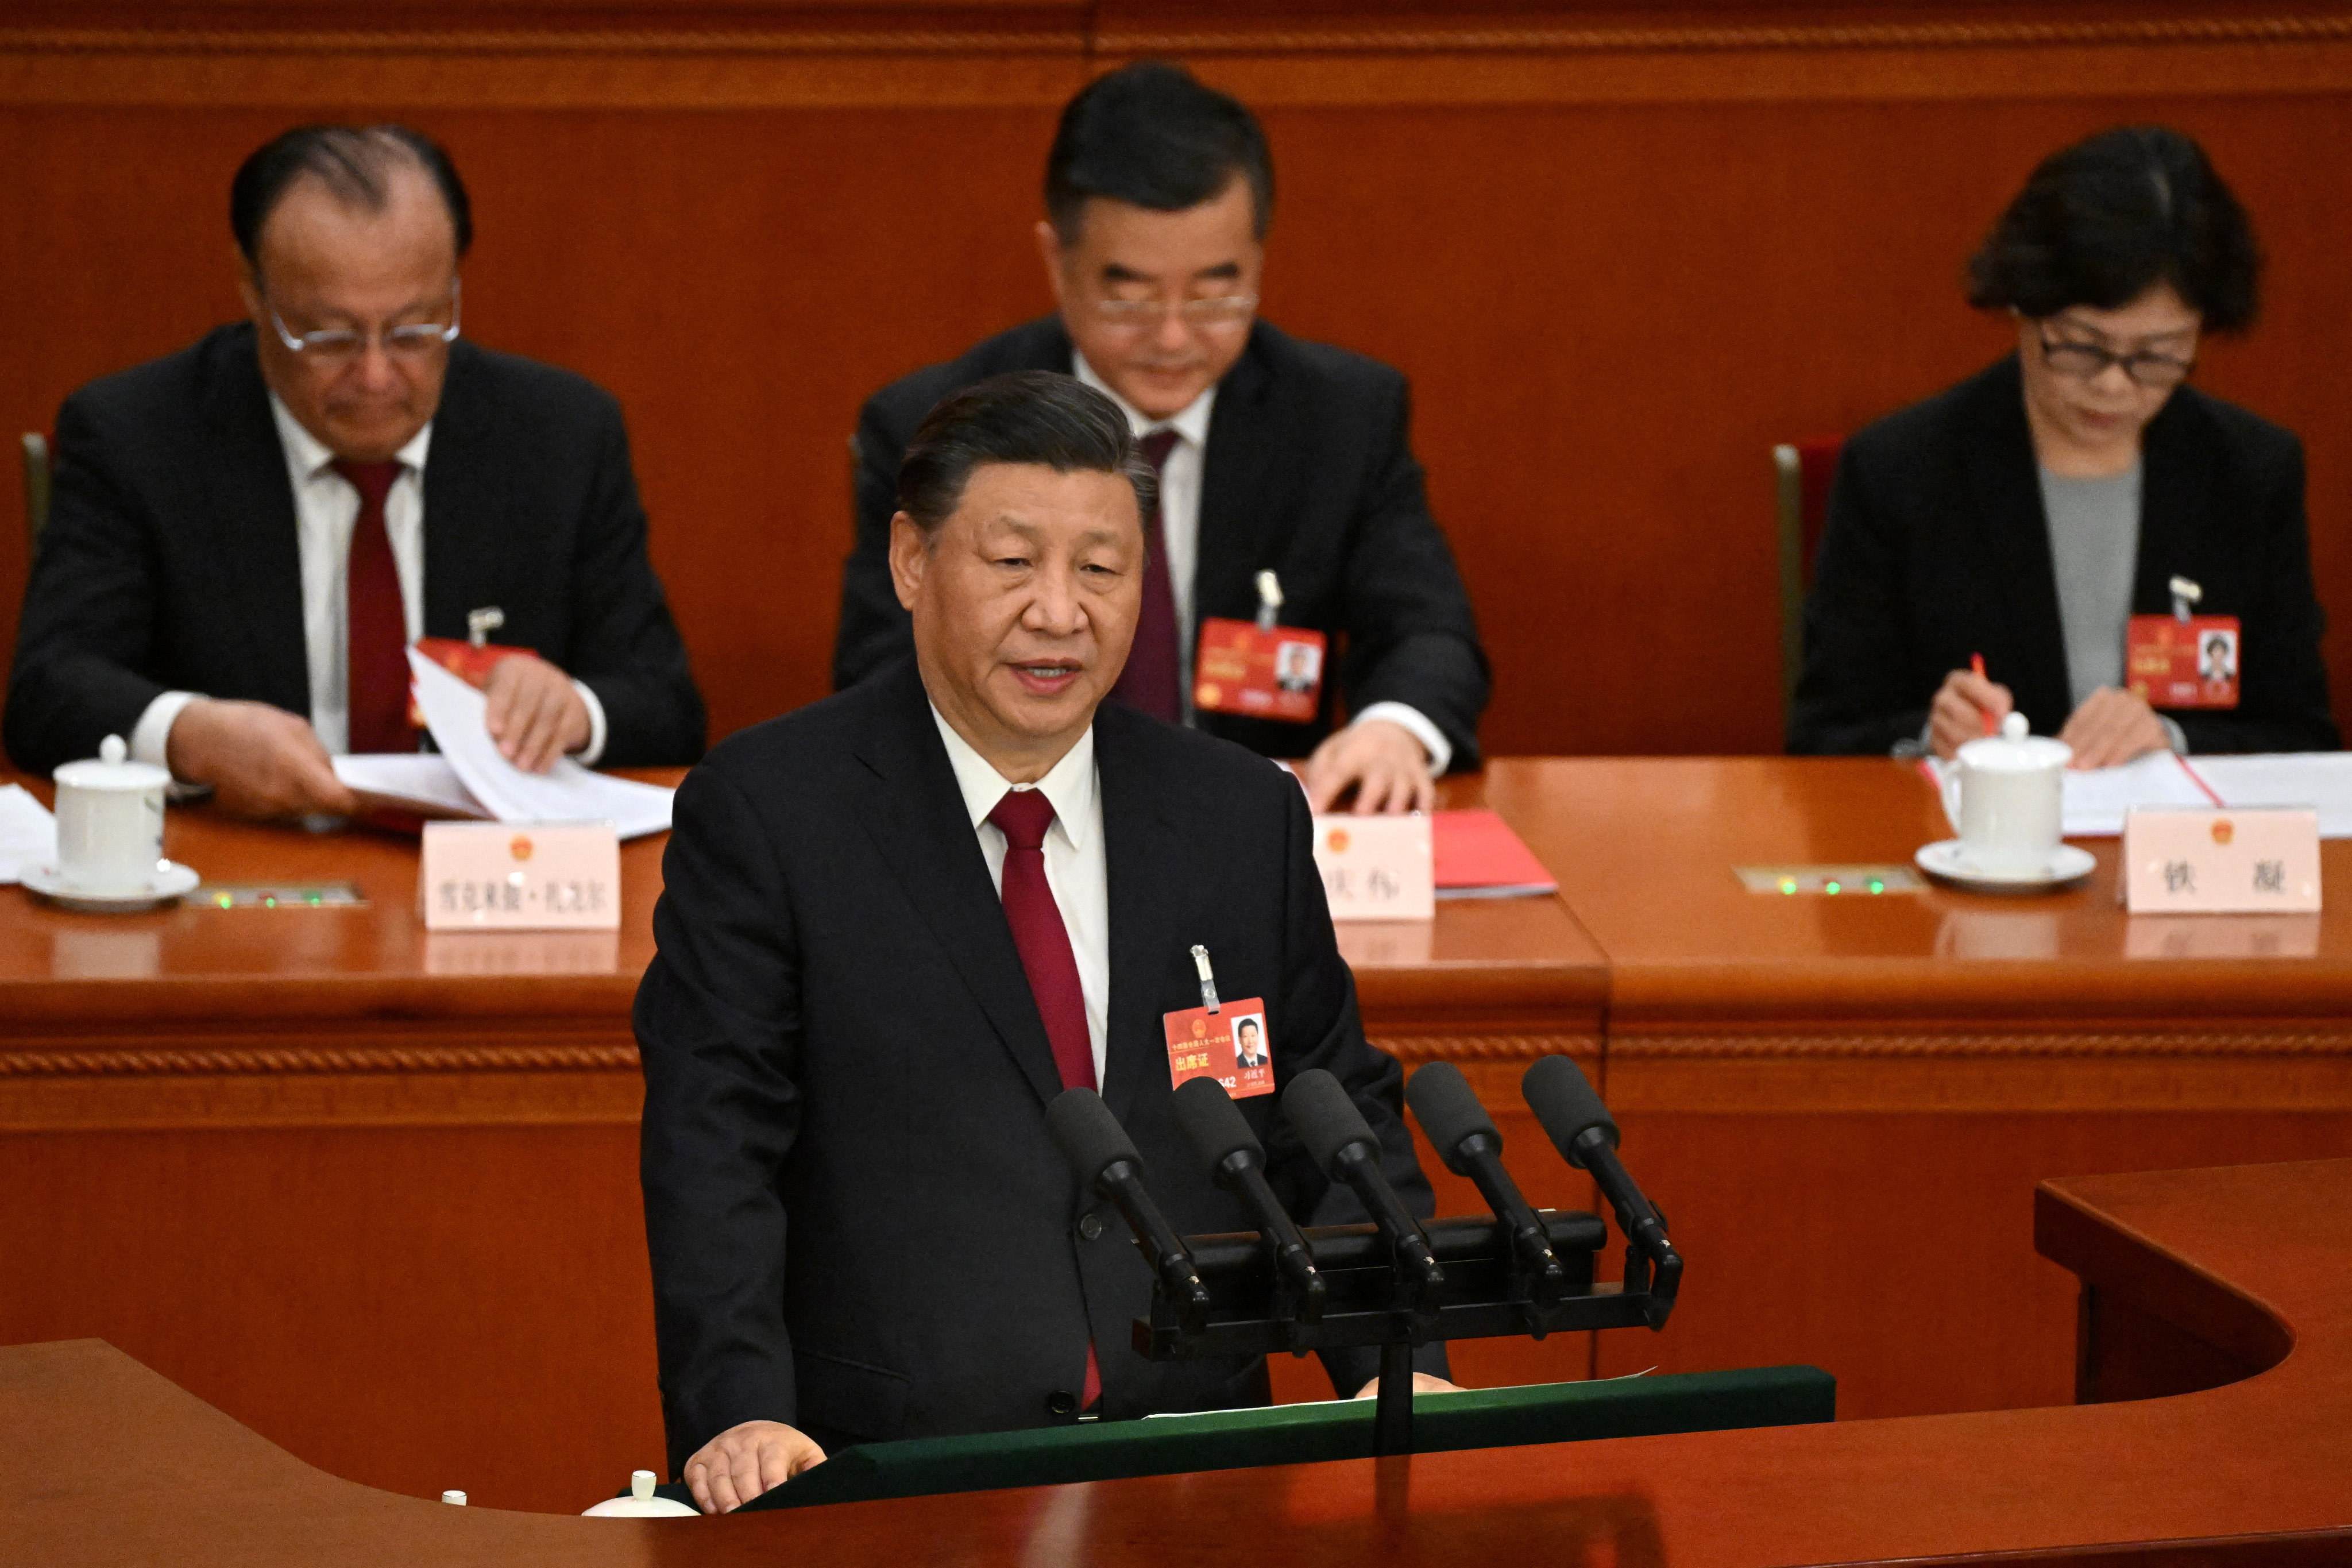 China’s President Xi Jinping speaks during the closing session of the National People’s Congress at the Great Hall of the People in Beijing on March 13, 2023.  He capped this year’s National People’s Congress by securing a third, norm-defying term in office. Photo: Reuters